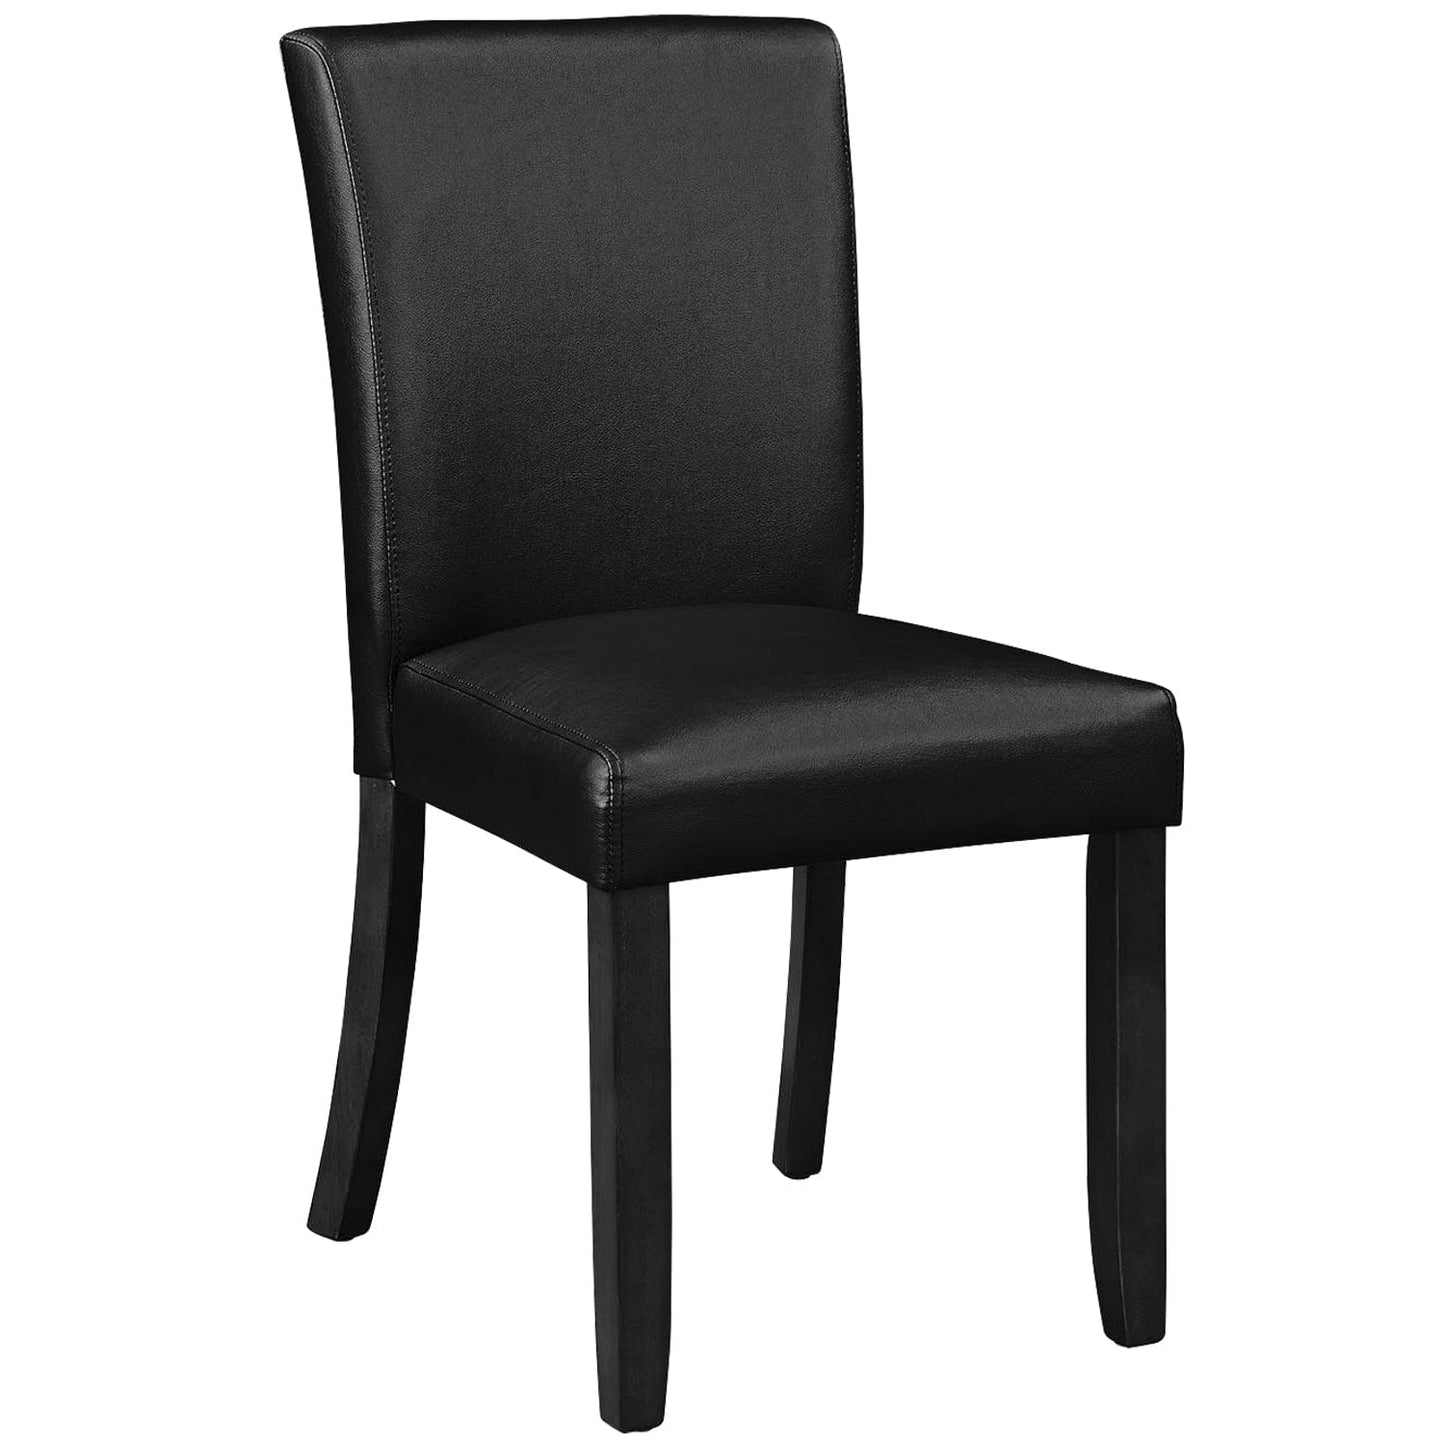 RAM Game Room Game Chair Game/Dining Chair - Black